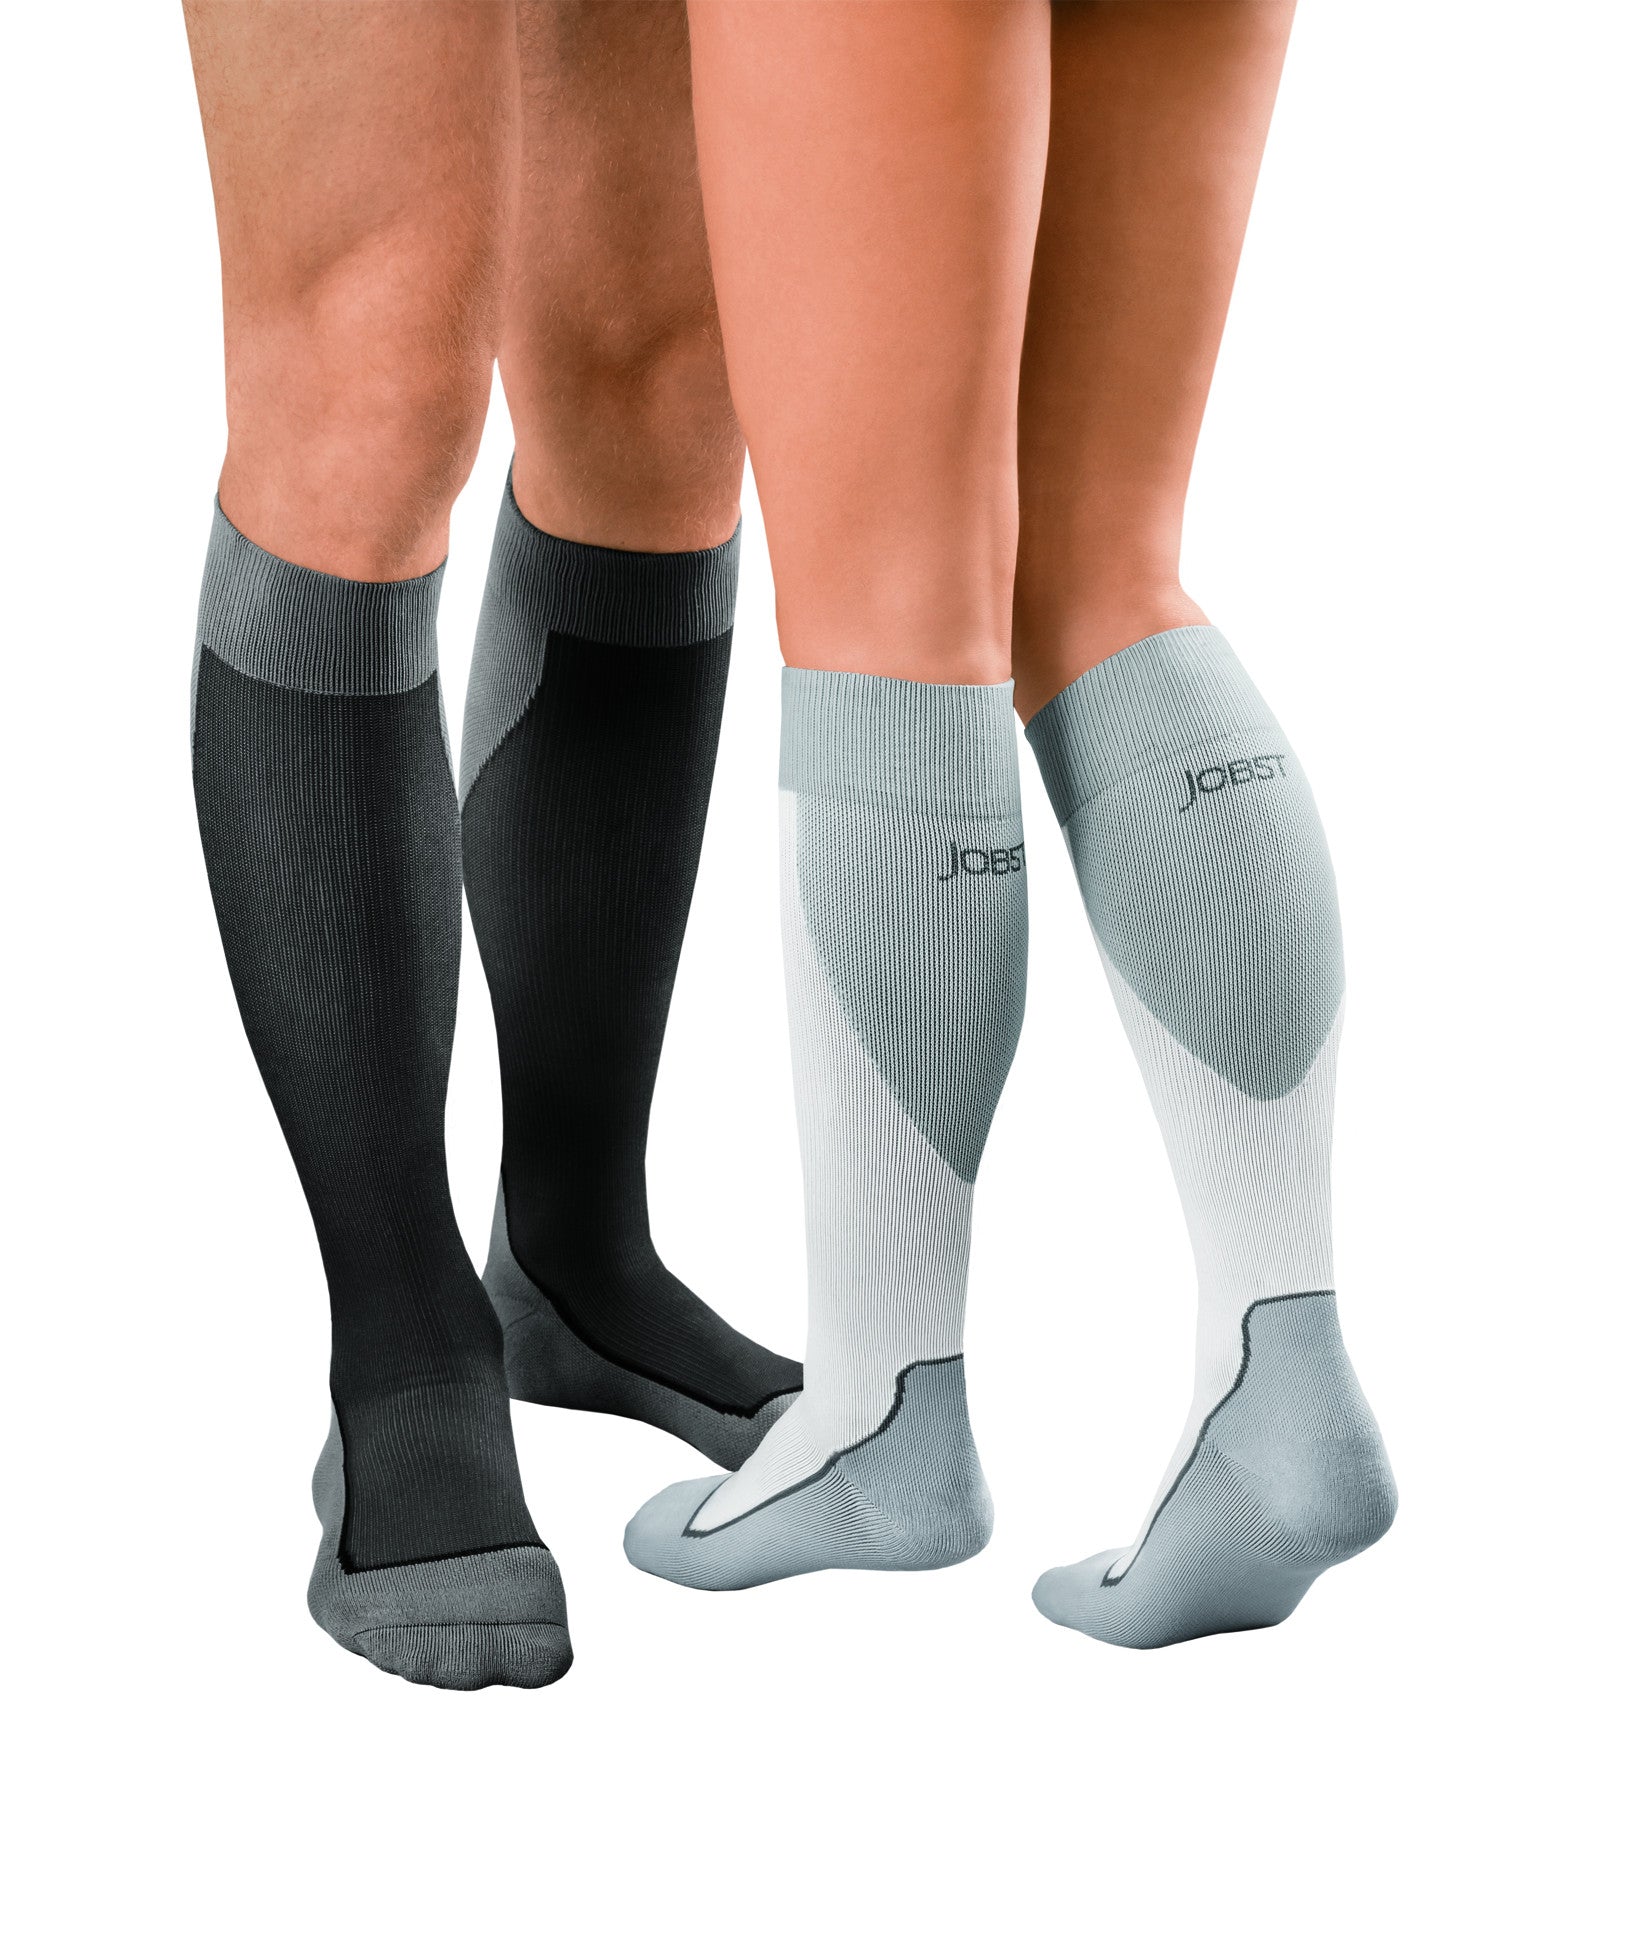 Stay stylish and comfortable on your travels with VIM & VIGR compression  socks